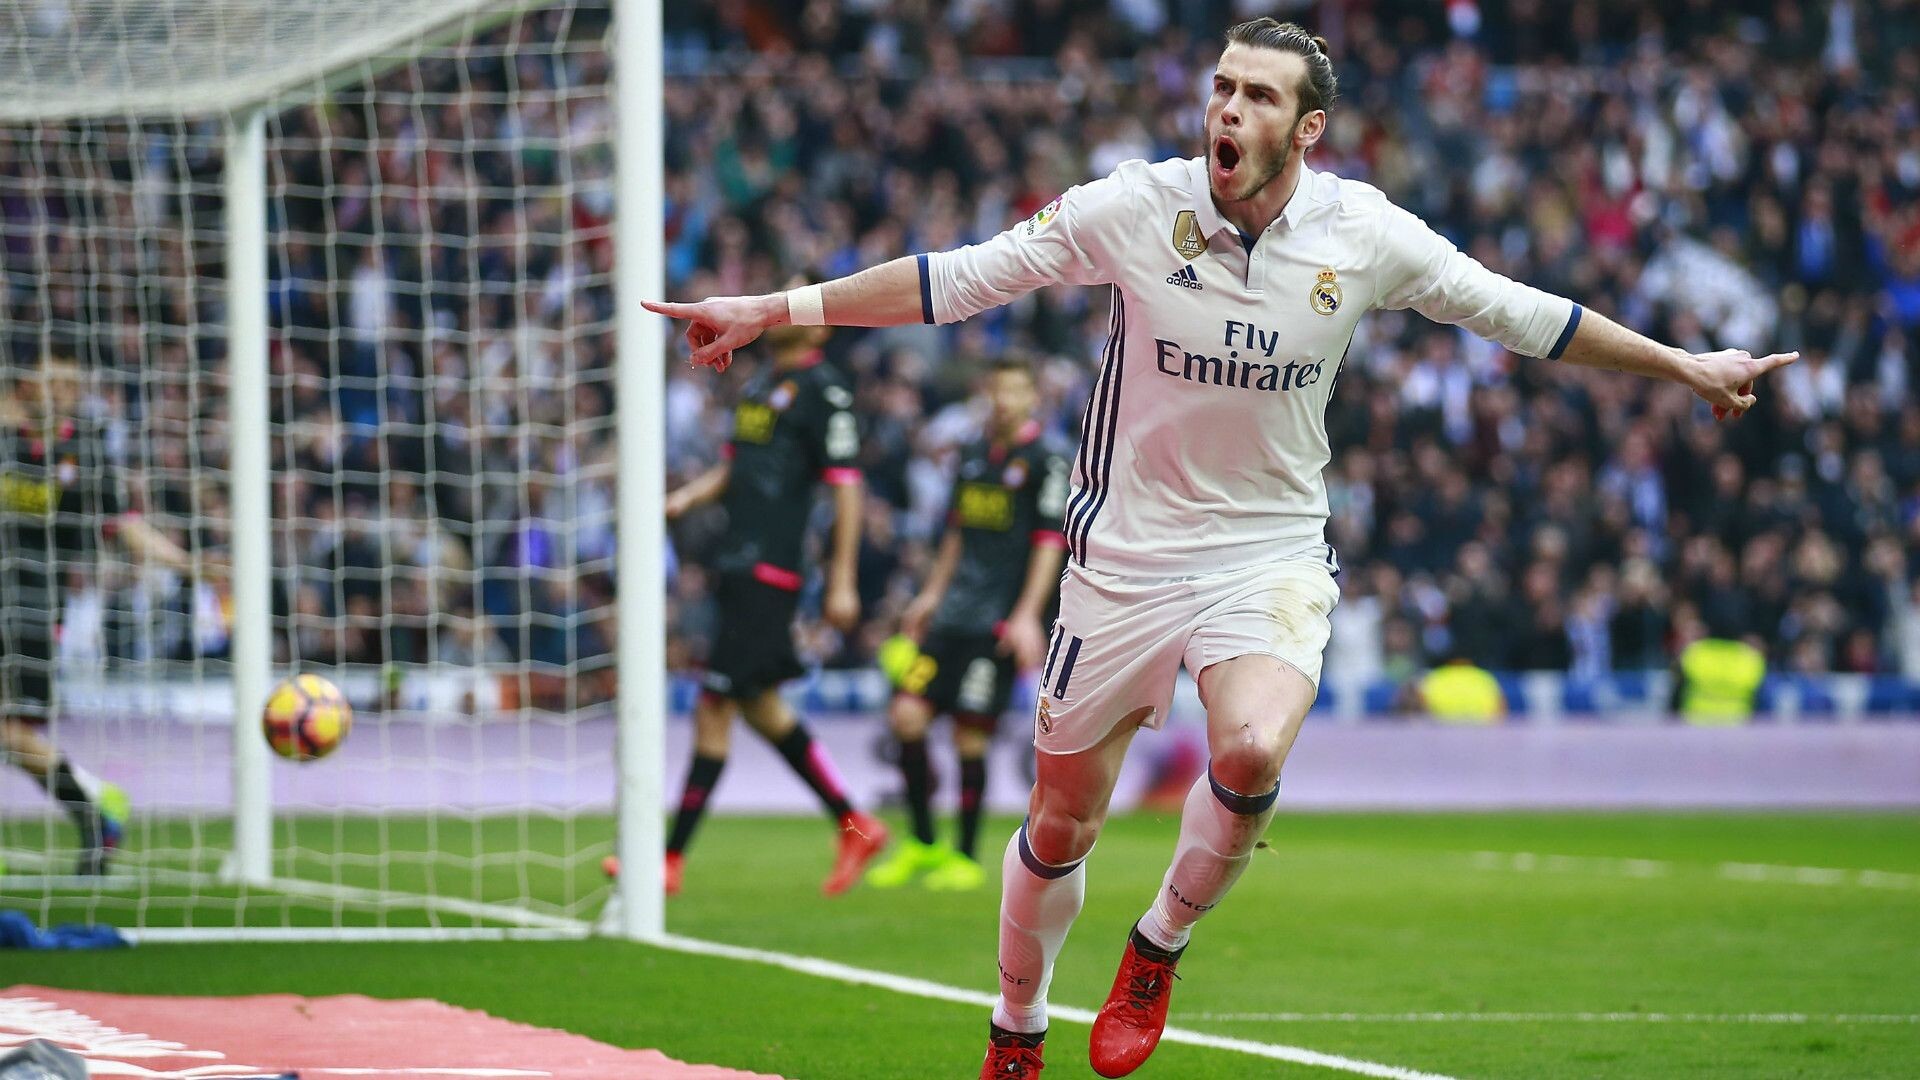 Gareth Bale: Celebration after scoring a goal, A free kick specialist and an offensive left-winger, UEFA CL. 1920x1080 Full HD Background.